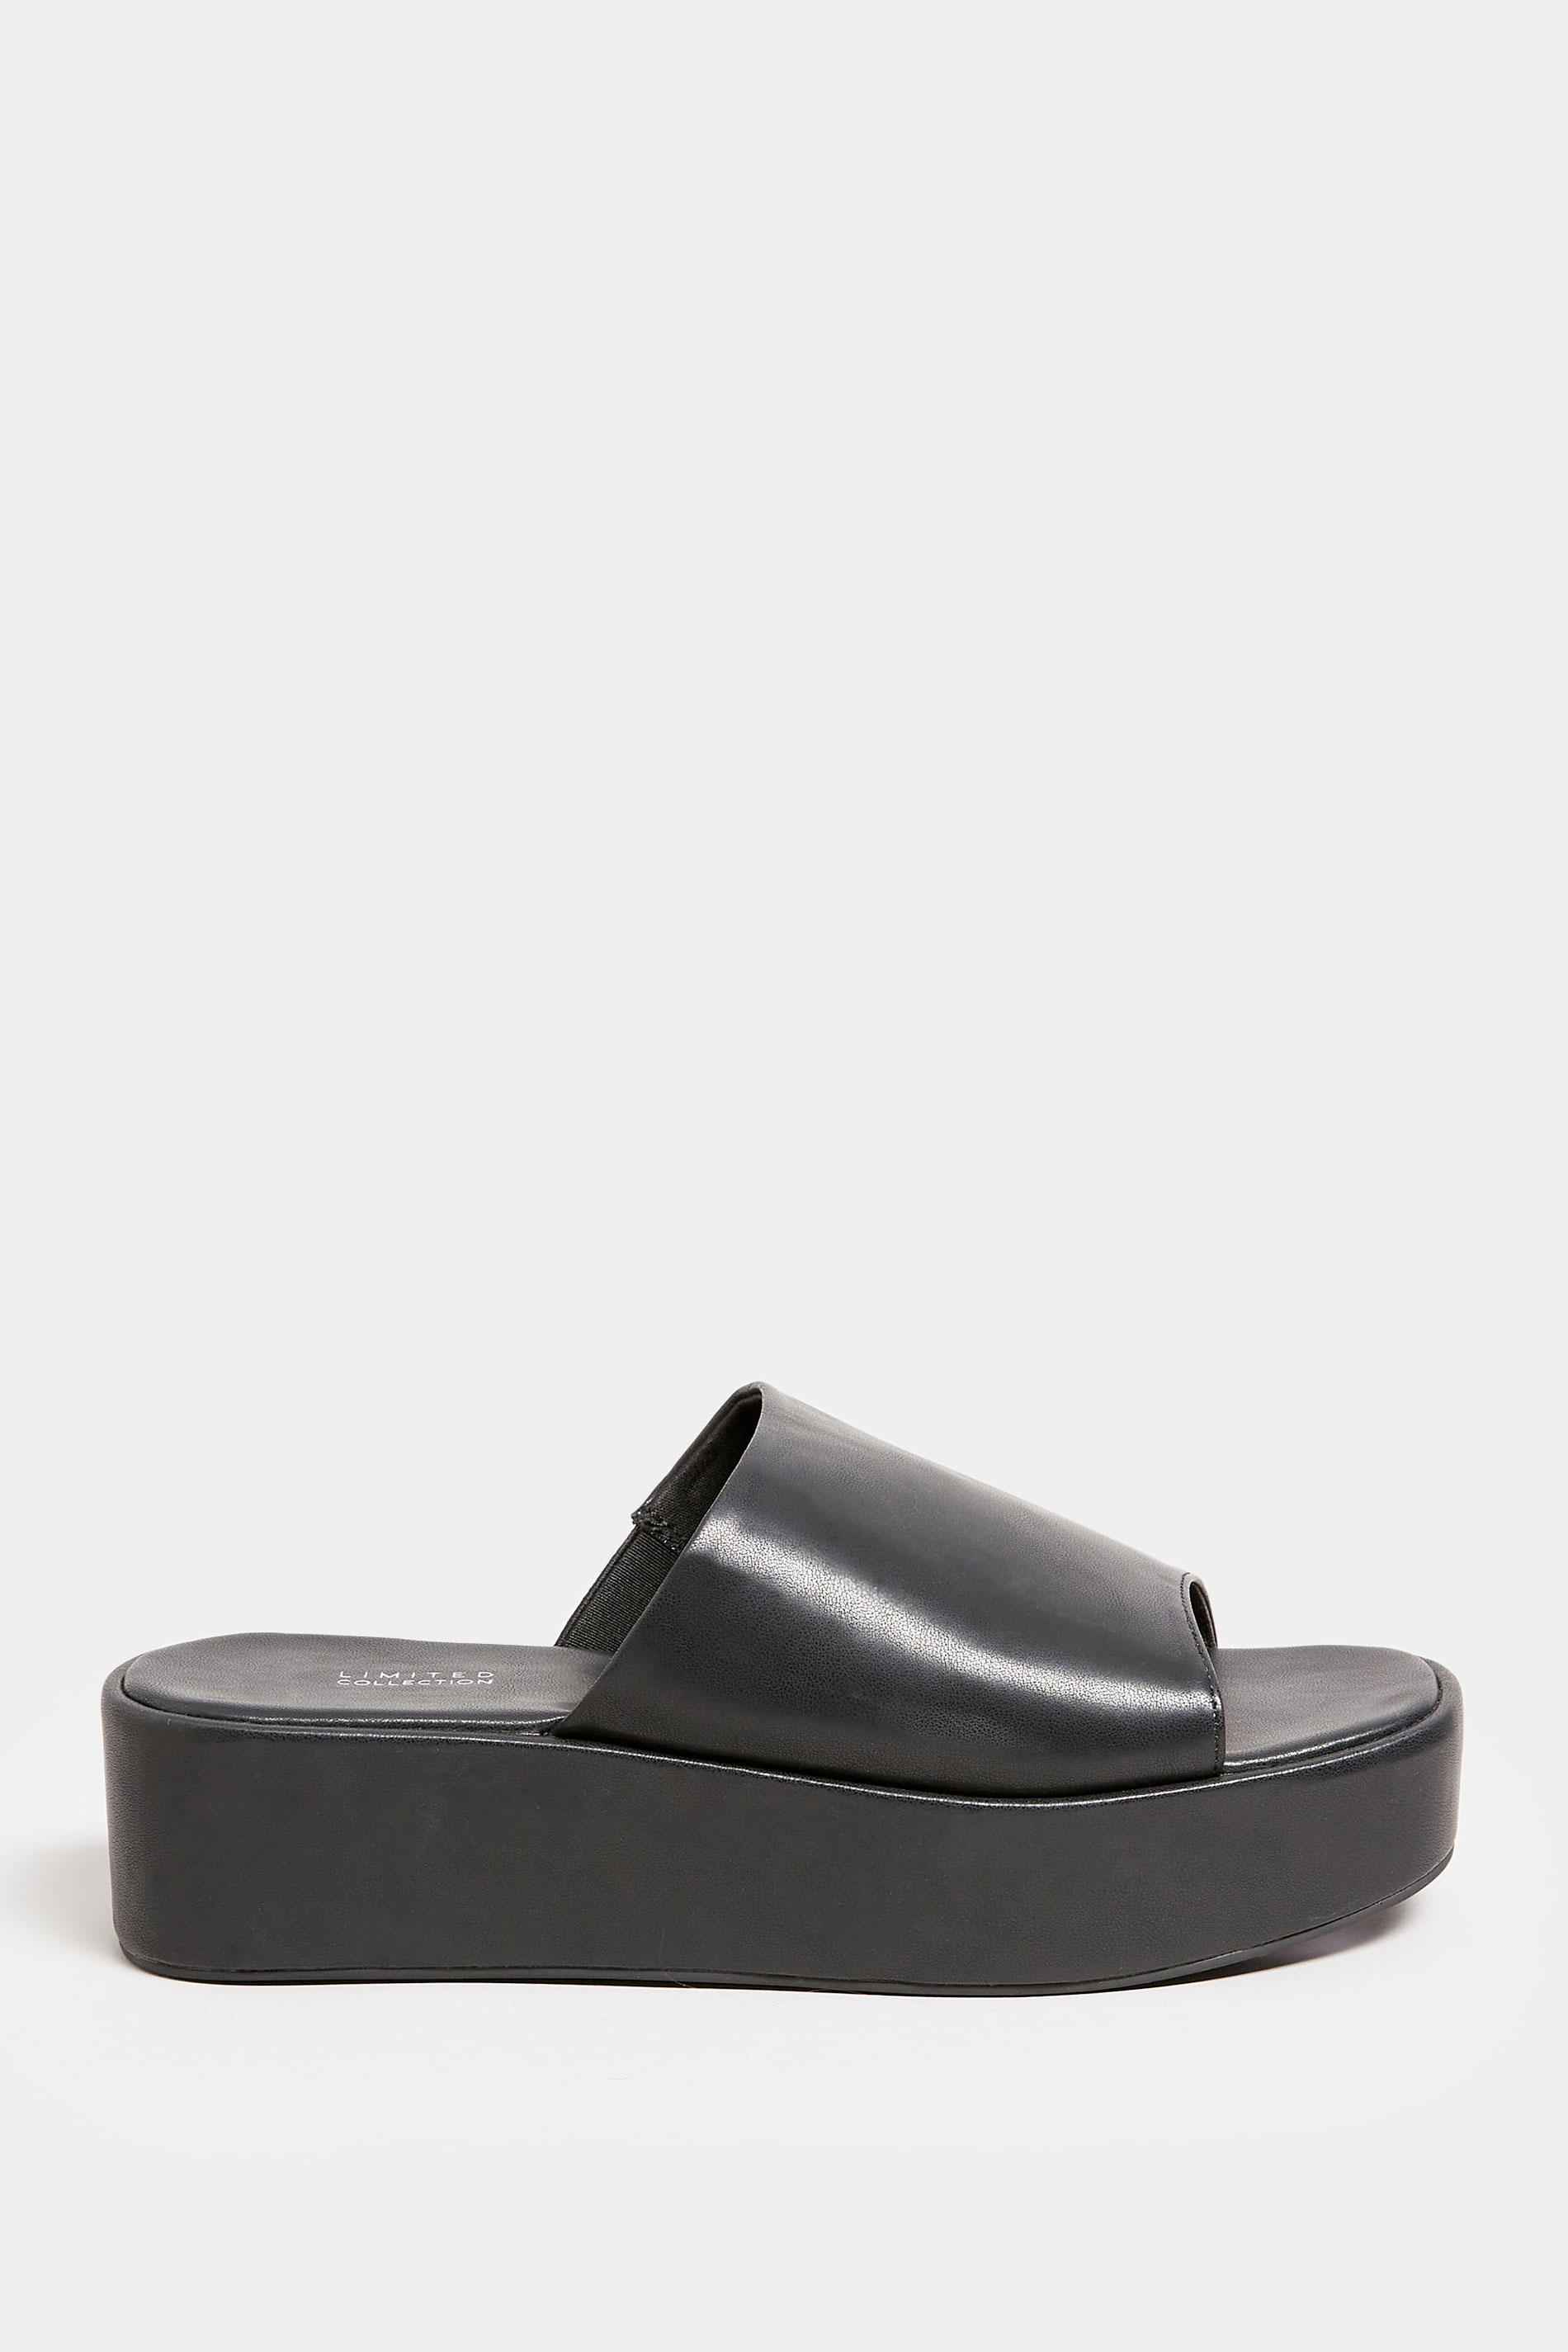 LIMITED COLLECTION Black Platform Mule Sandals In E Wide Fit & EEE Extra Wide Fit 3